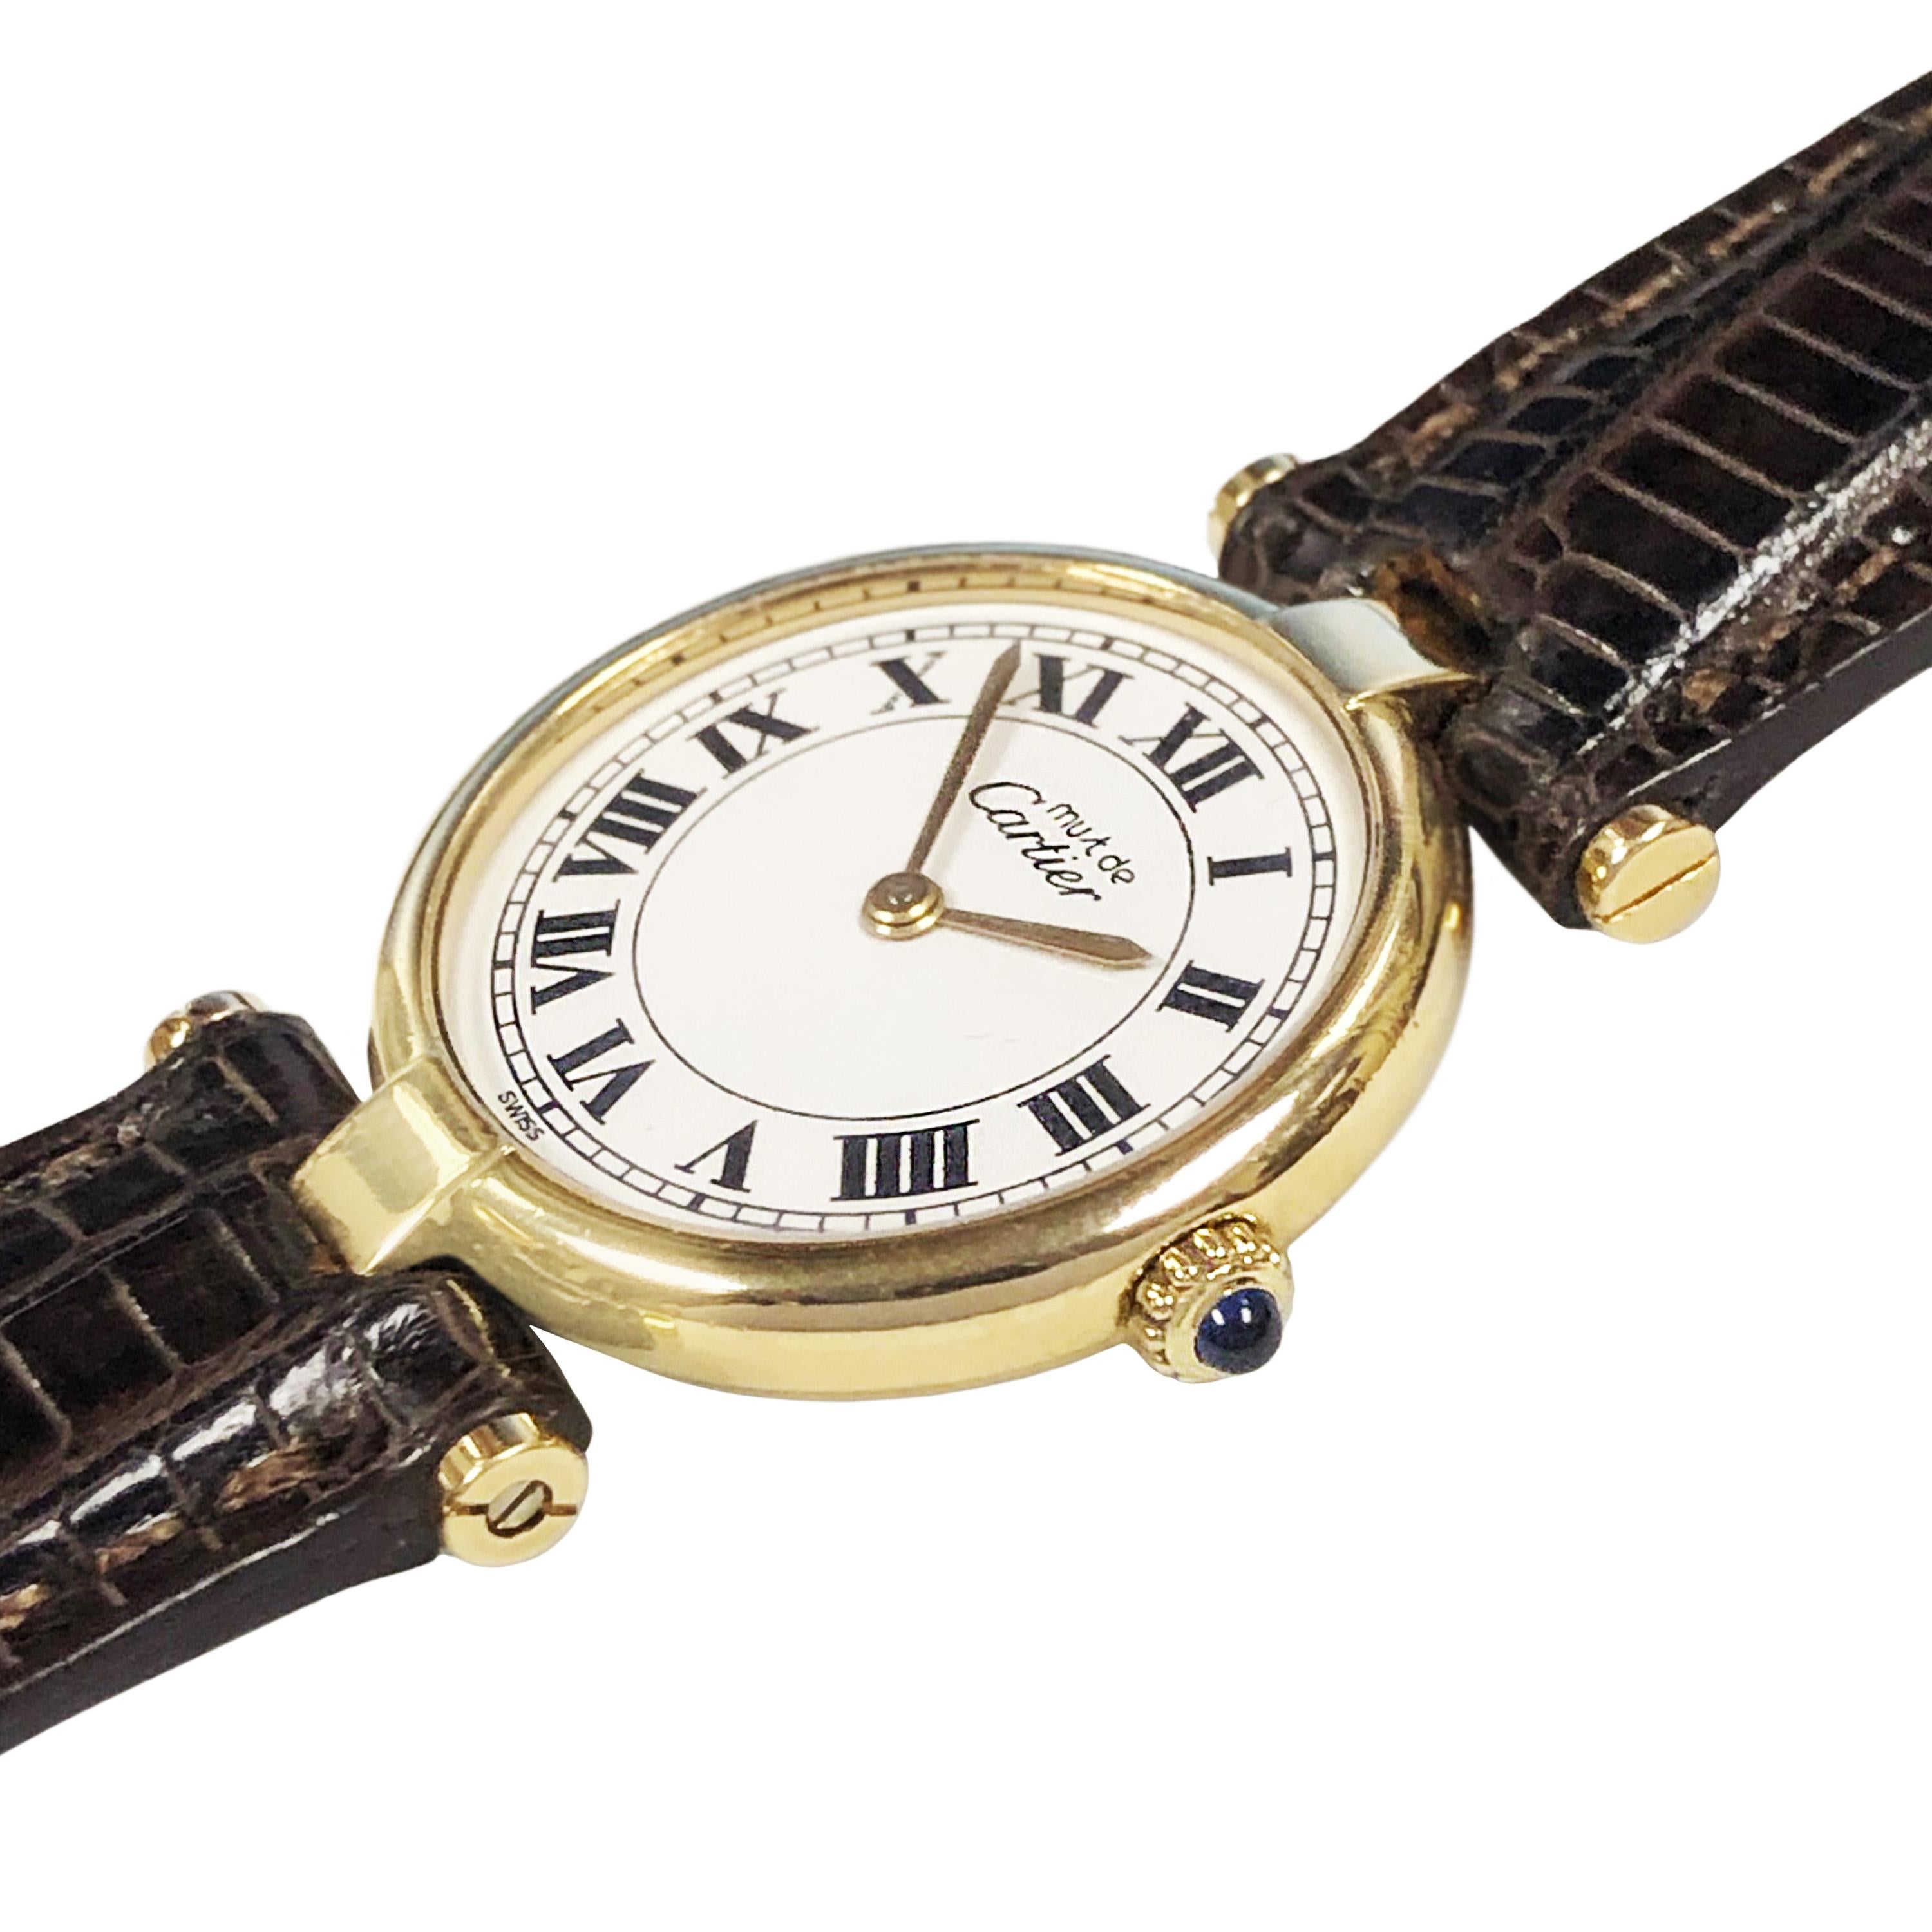 Circa 2005 Cartier Must De Cartier Vendome Ladies Wrist Watch, 24 MM 2 Piece Vermeil, Gold Plate on Sterling Silver case. Quartz Movement, White dial with Black Roman Numerals. New Brown Lizard strap and a Cartier Gold Plate Tang Buckle. Comes in a